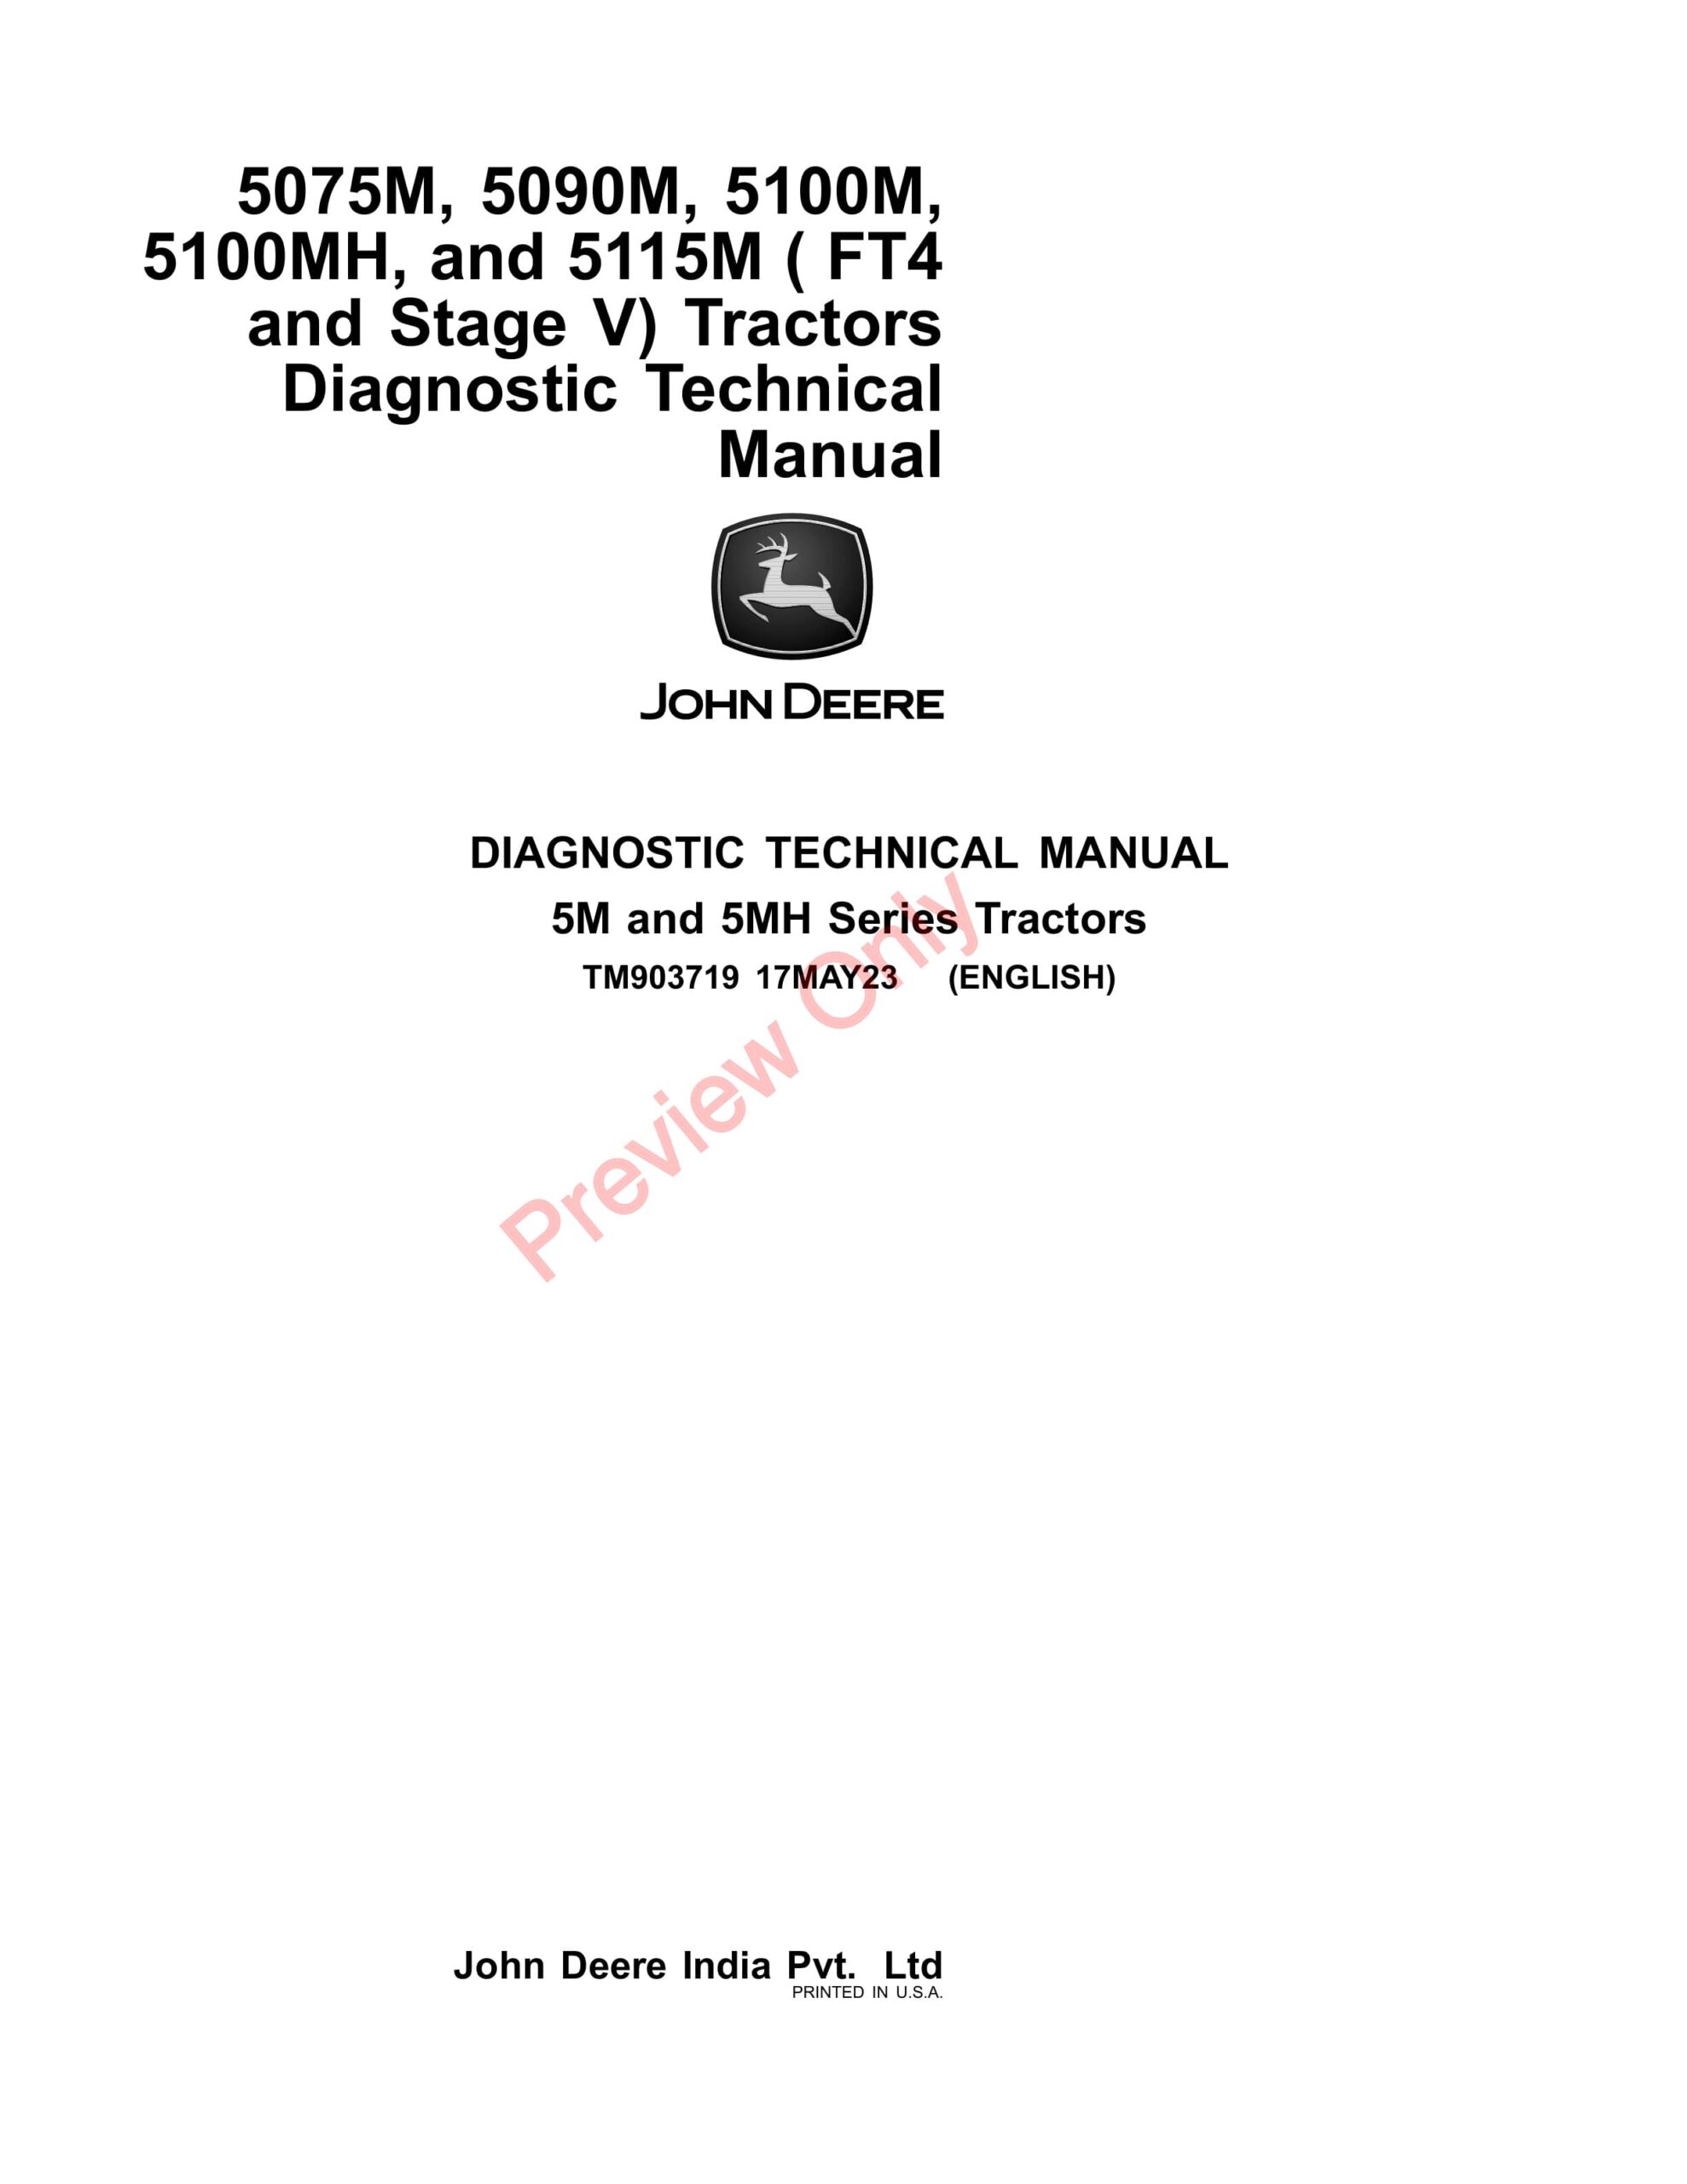 John Deere 5075M, 5090M, 5100M, 5100MH, and 5115M (FT4 and Stage V) Tractors Diagnostic Technical Manual TM903719 17MAY23-1